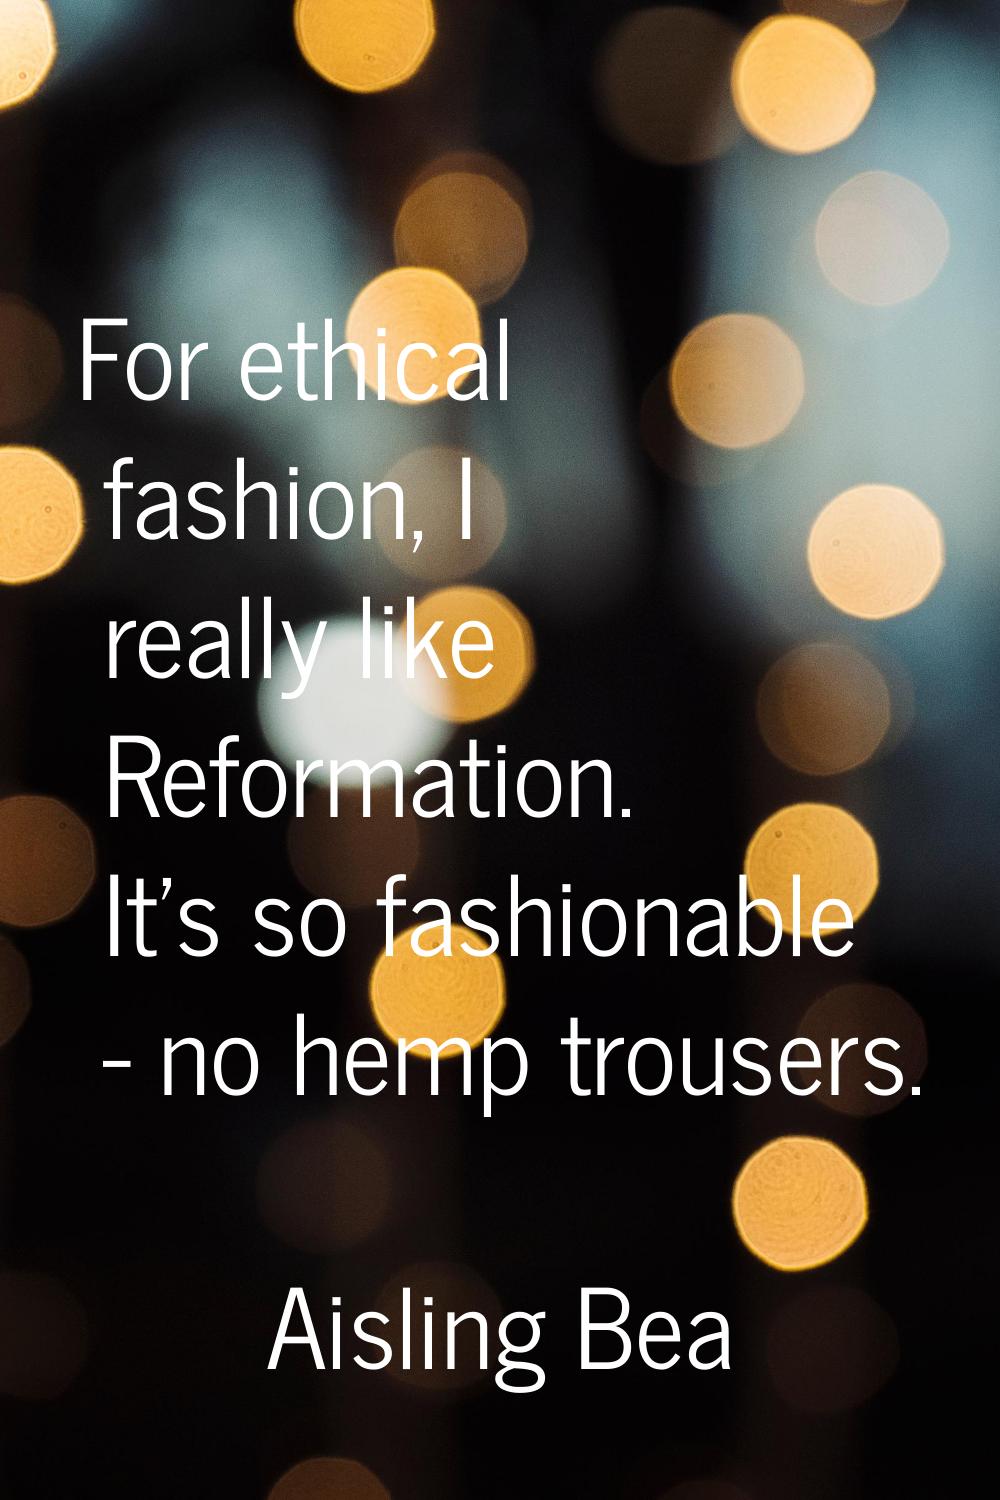 For ethical fashion, I really like Reformation. It's so fashionable - no hemp trousers.